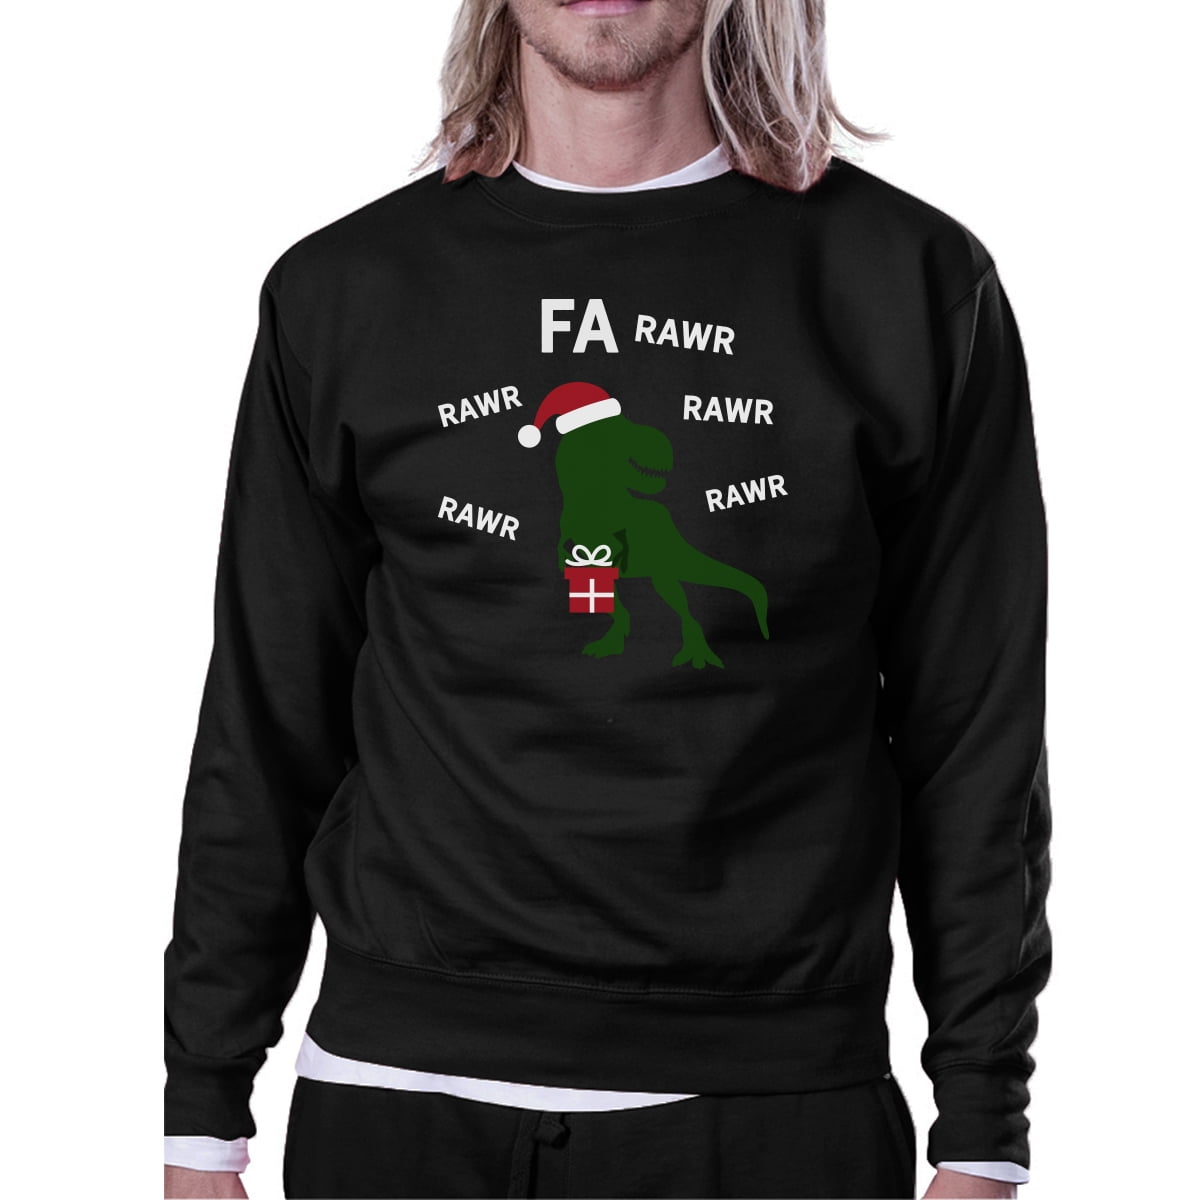 Details about   Fa Rawr Rawr Rawr T-rex Christmas Pullover Fleece Humorous Gifts 